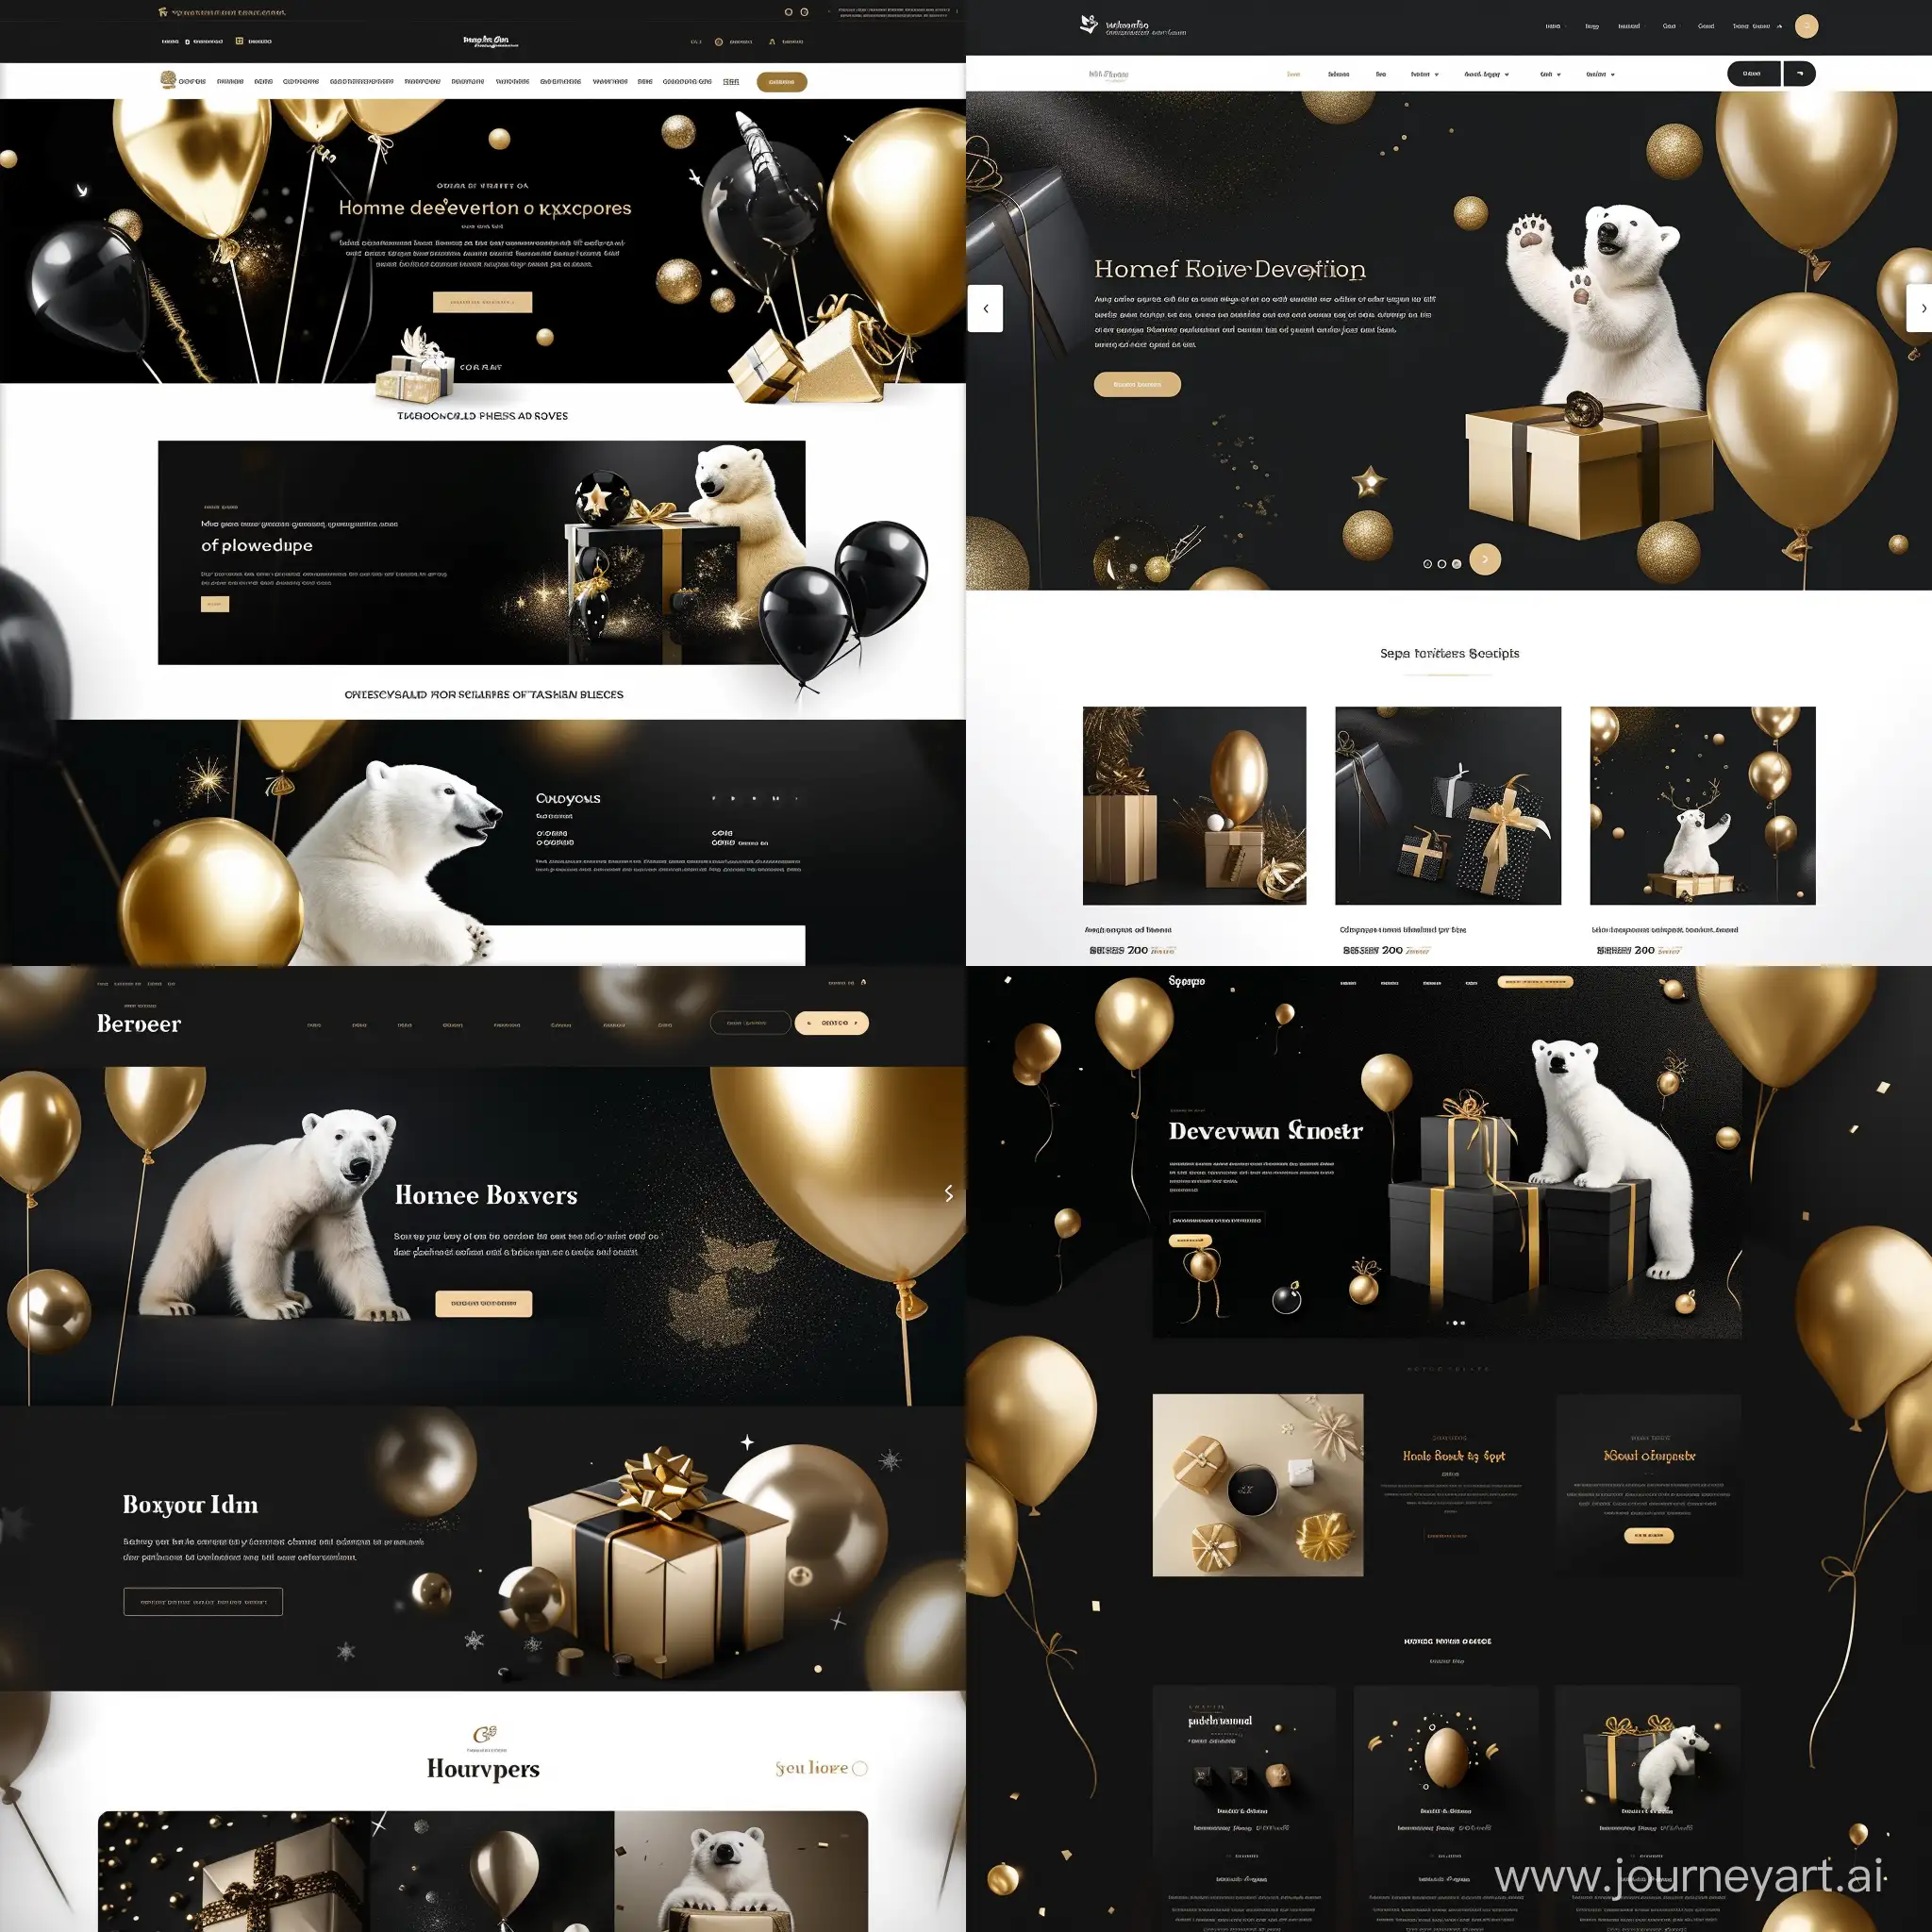 "Please design a website for home-delivered surprises with a black and gold color theme. The site should convey the excitement and joy of receiving surprises, utilizing a combination of black and gold colors for an elegant and festive atmosphere. Include relevant images of gift boxes, golden balloons, and polar bears. Ensure that the website navigation is intuitive and pleasant, enhancing the user experience. Incorporate clear sections for different surprise categories and special offers. Thank you!"